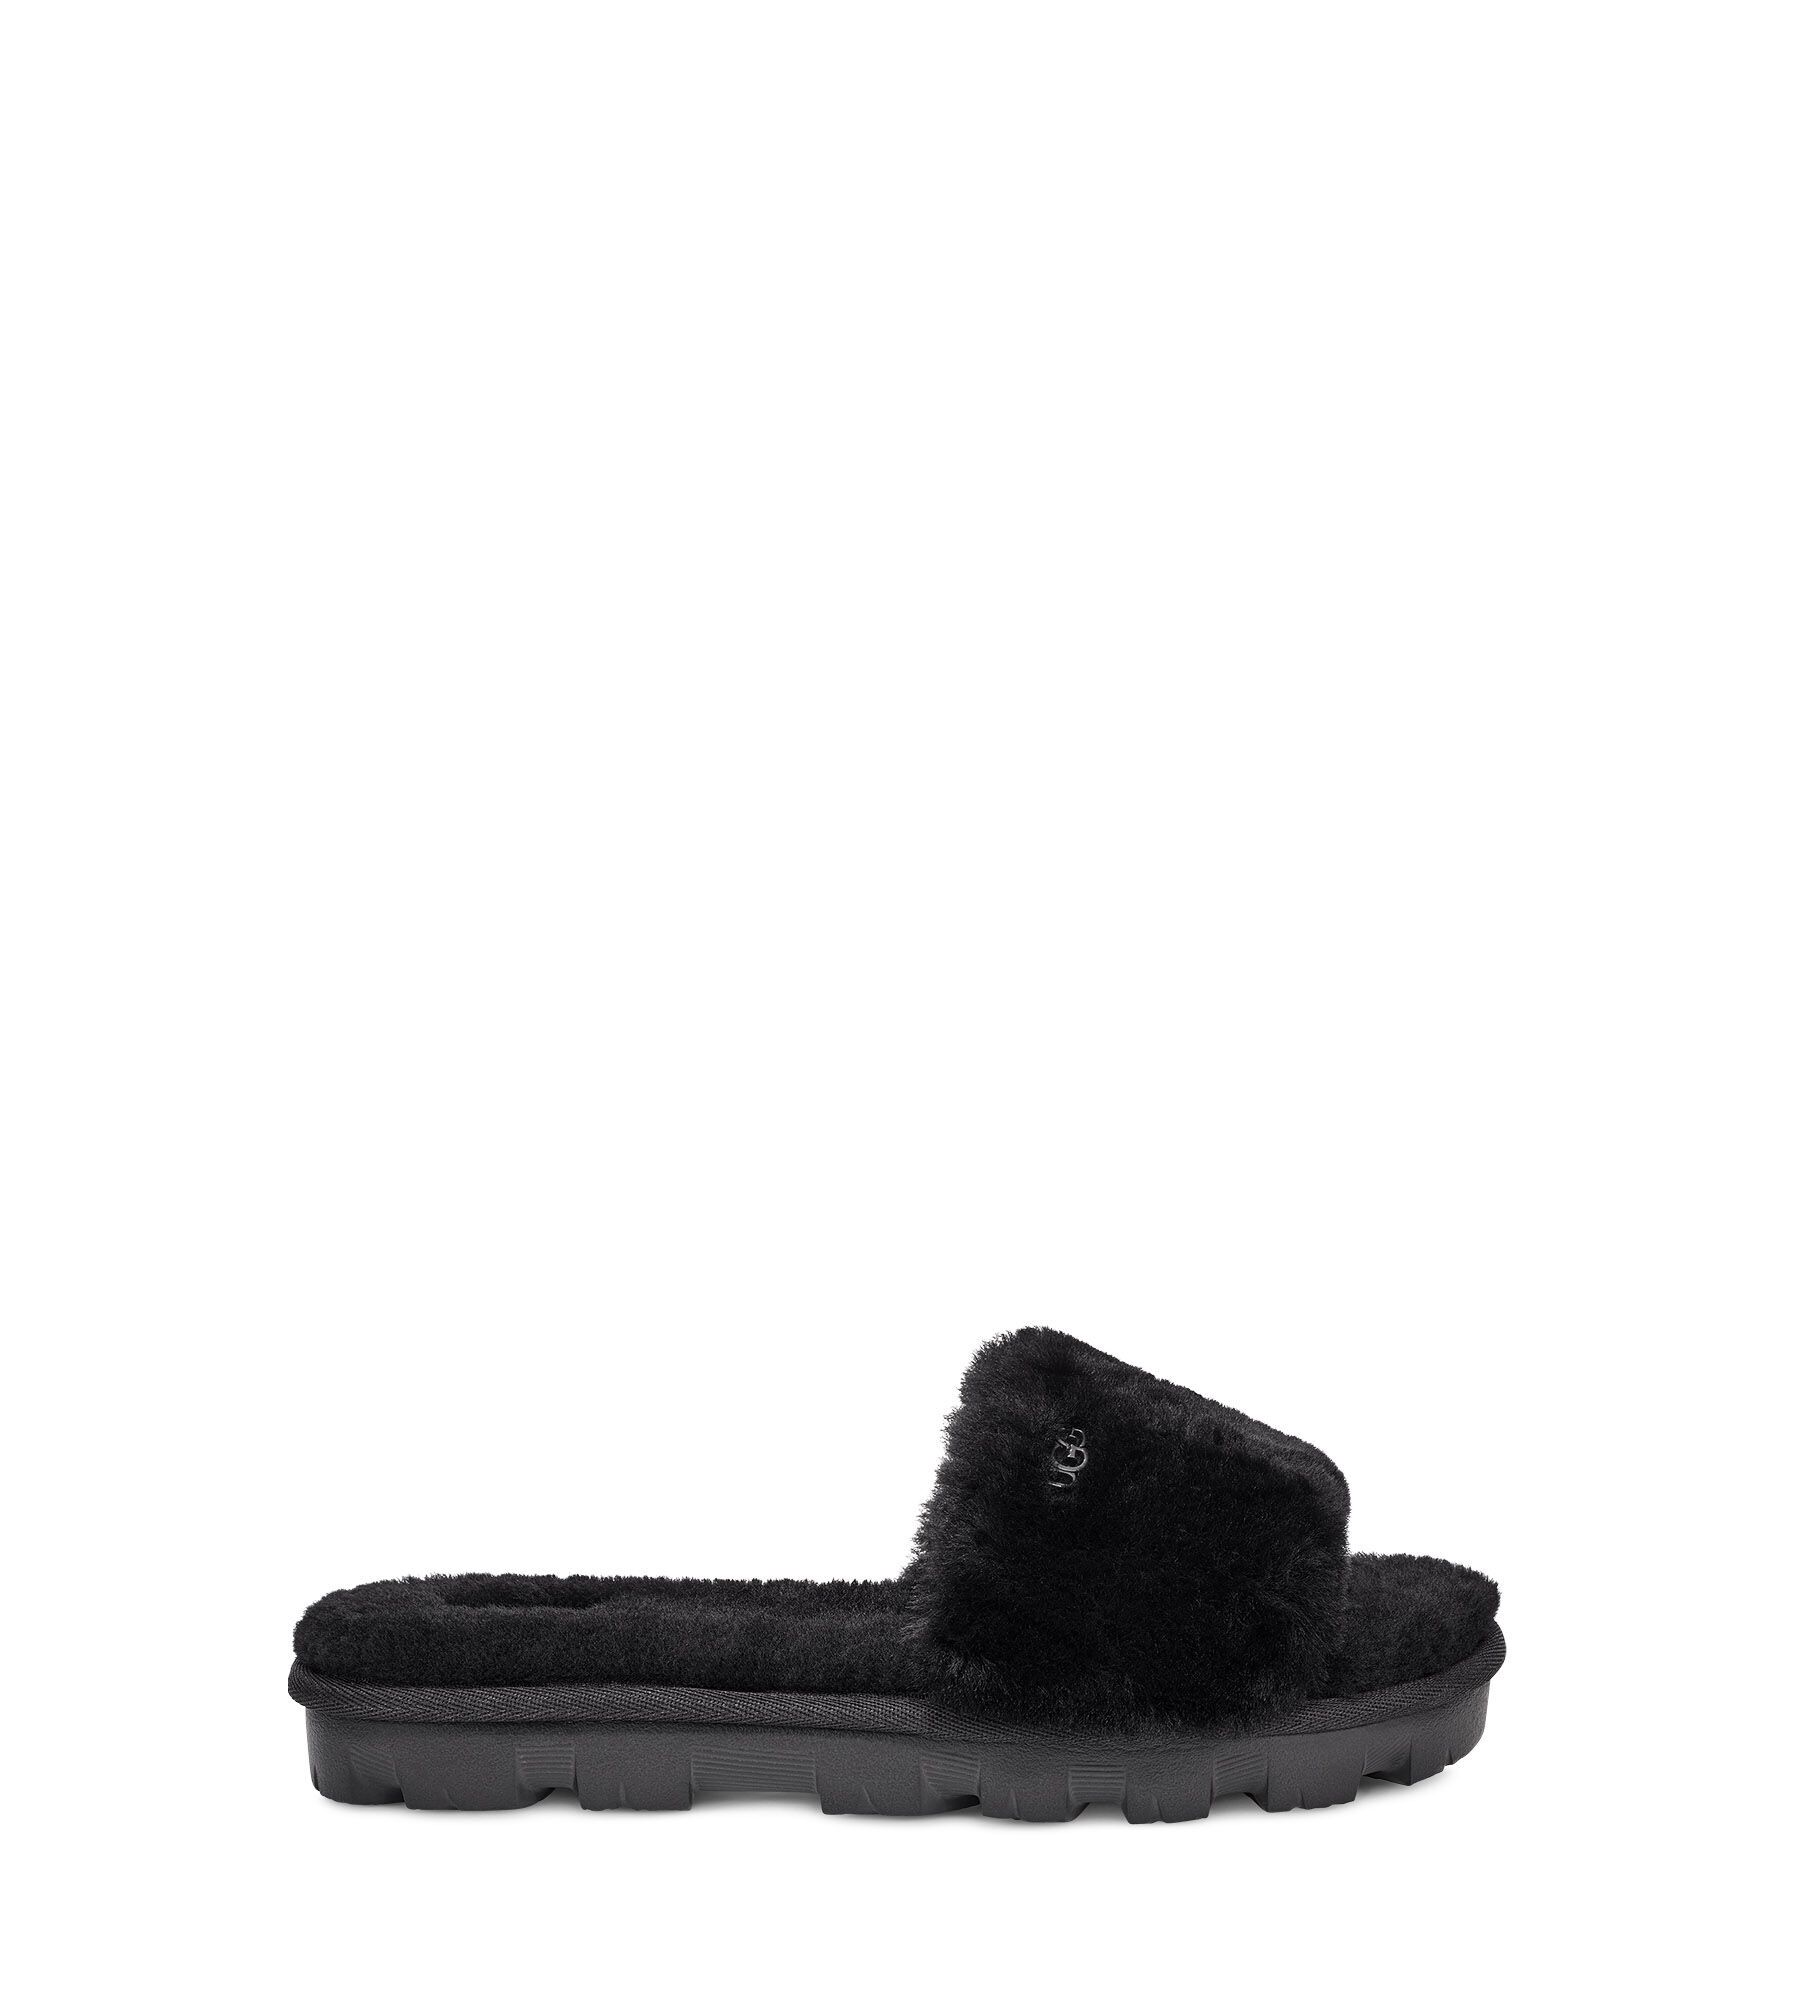 black and white ugg slippers